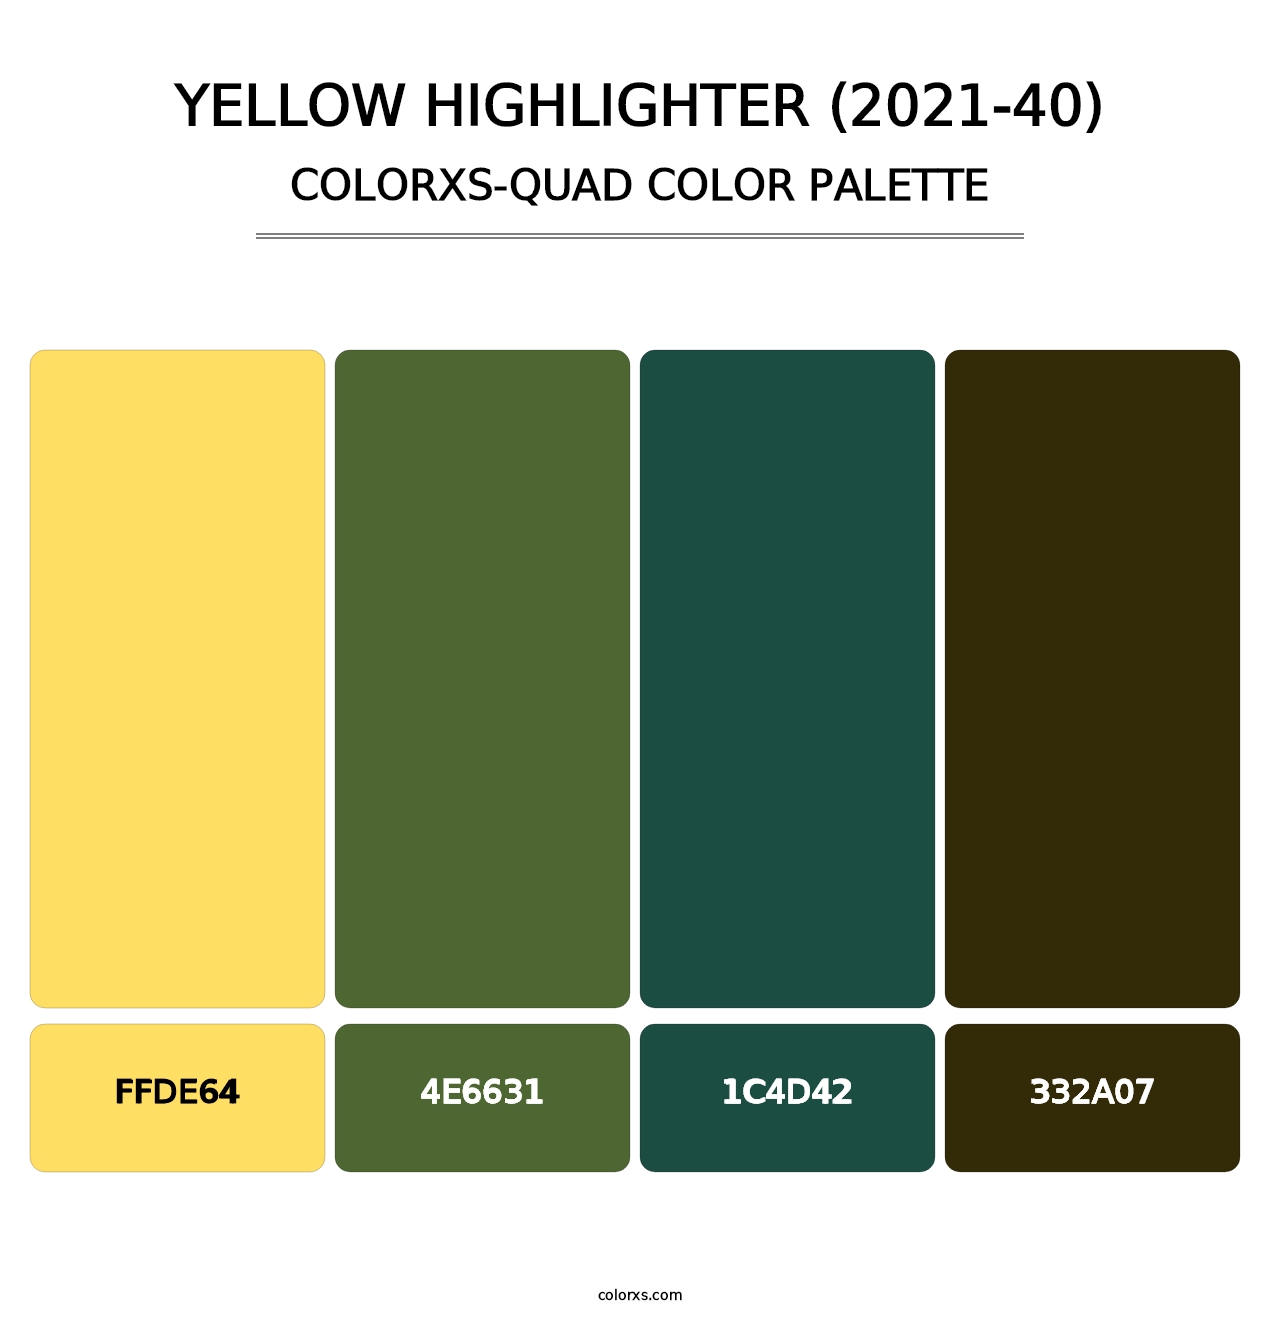 Yellow Highlighter (2021-40) - Colorxs Quad Palette